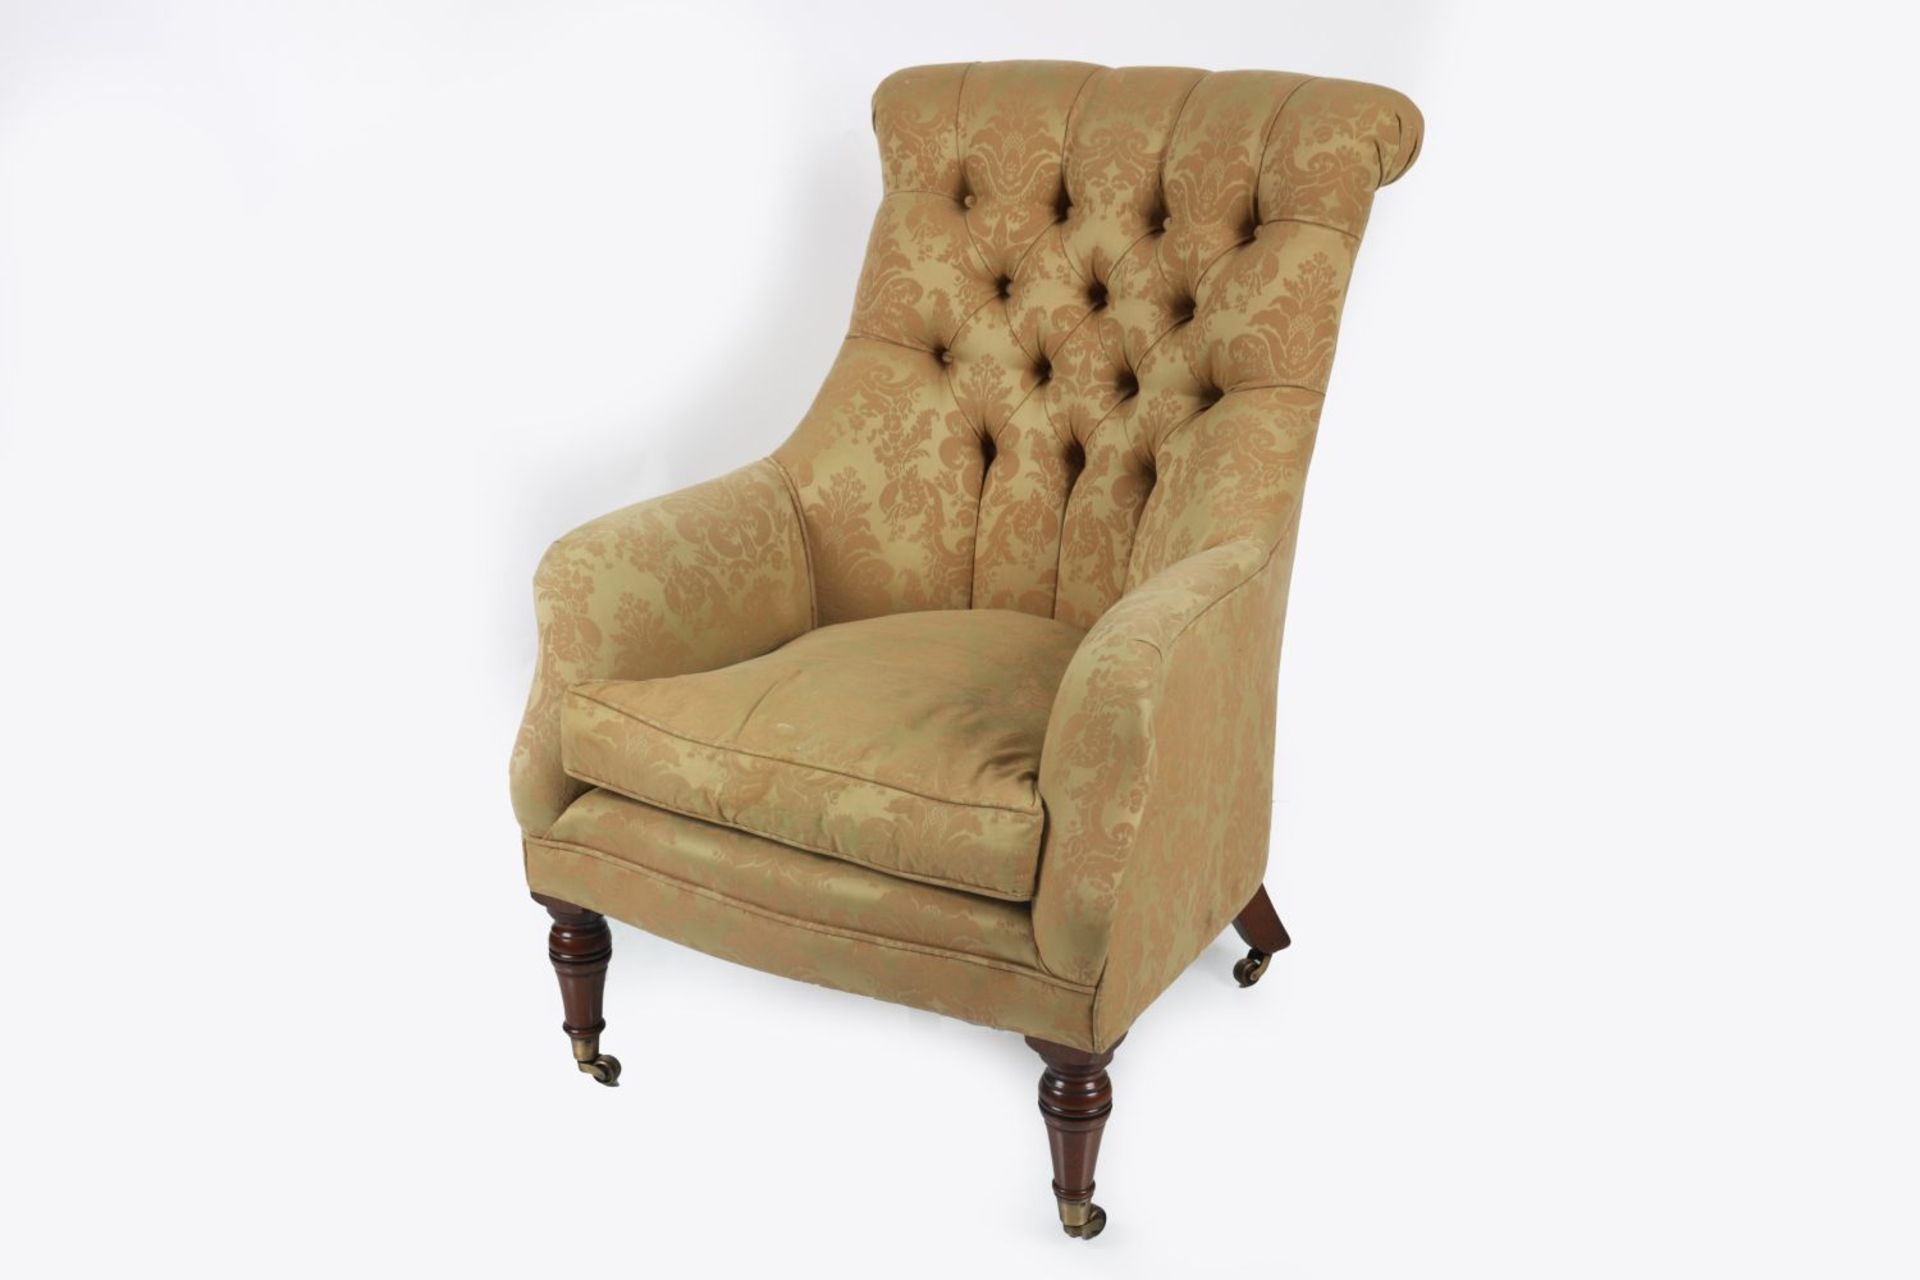 VICTORIAN STYLE UPHOLSTERED ARMCHAIR